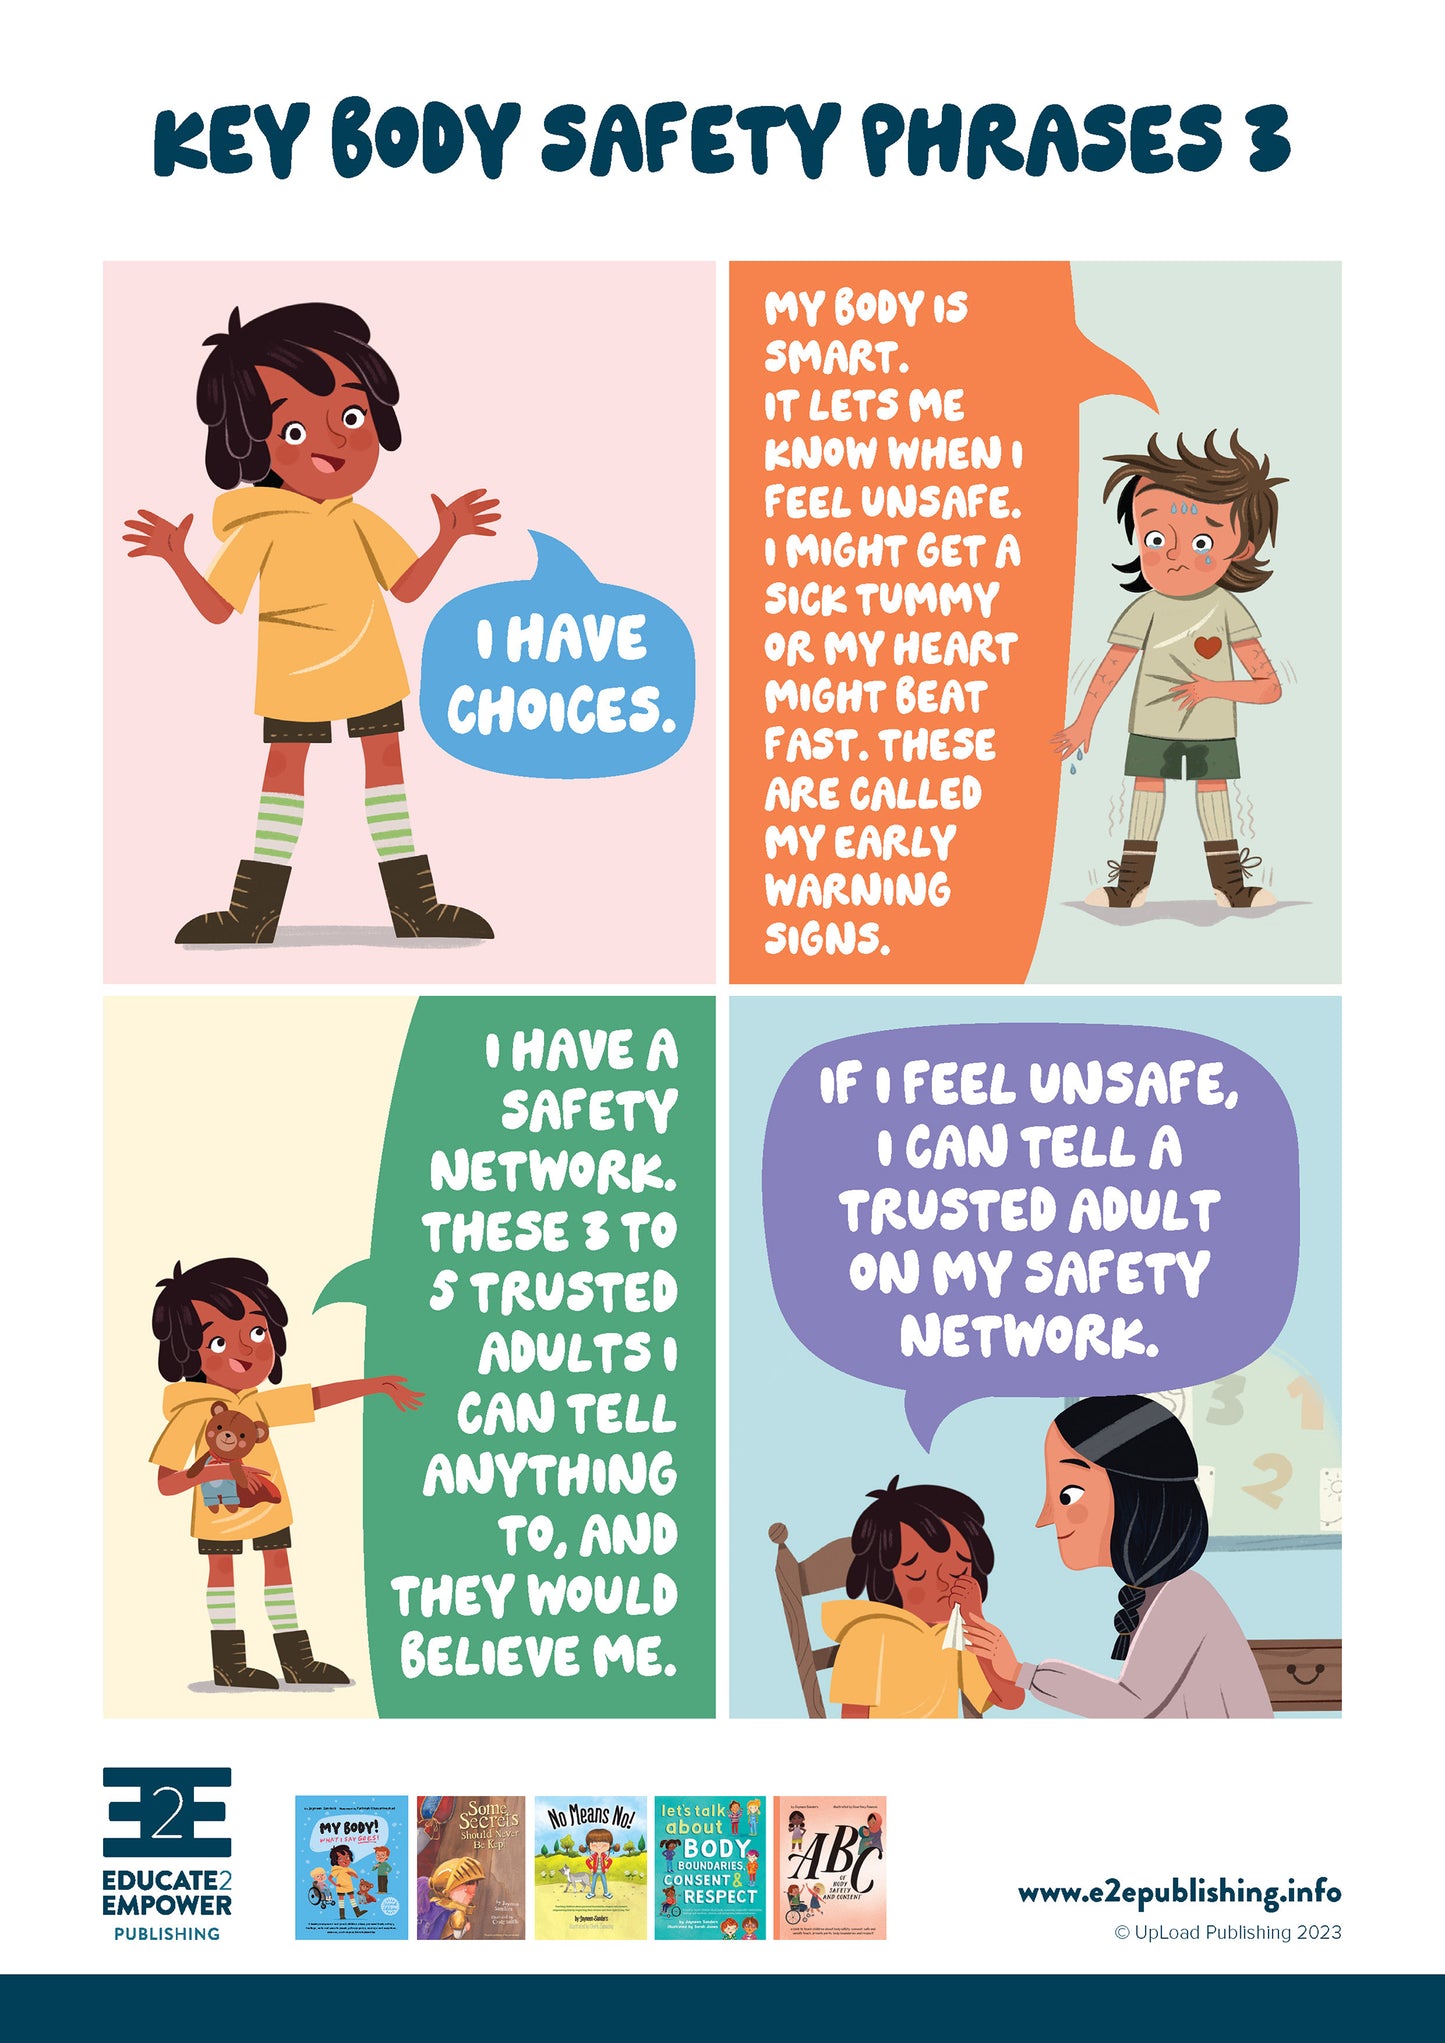 An activity sheet for children titled 'Key Body Safety Phrases' which contains cards to cut out, each containing an important body safety message.